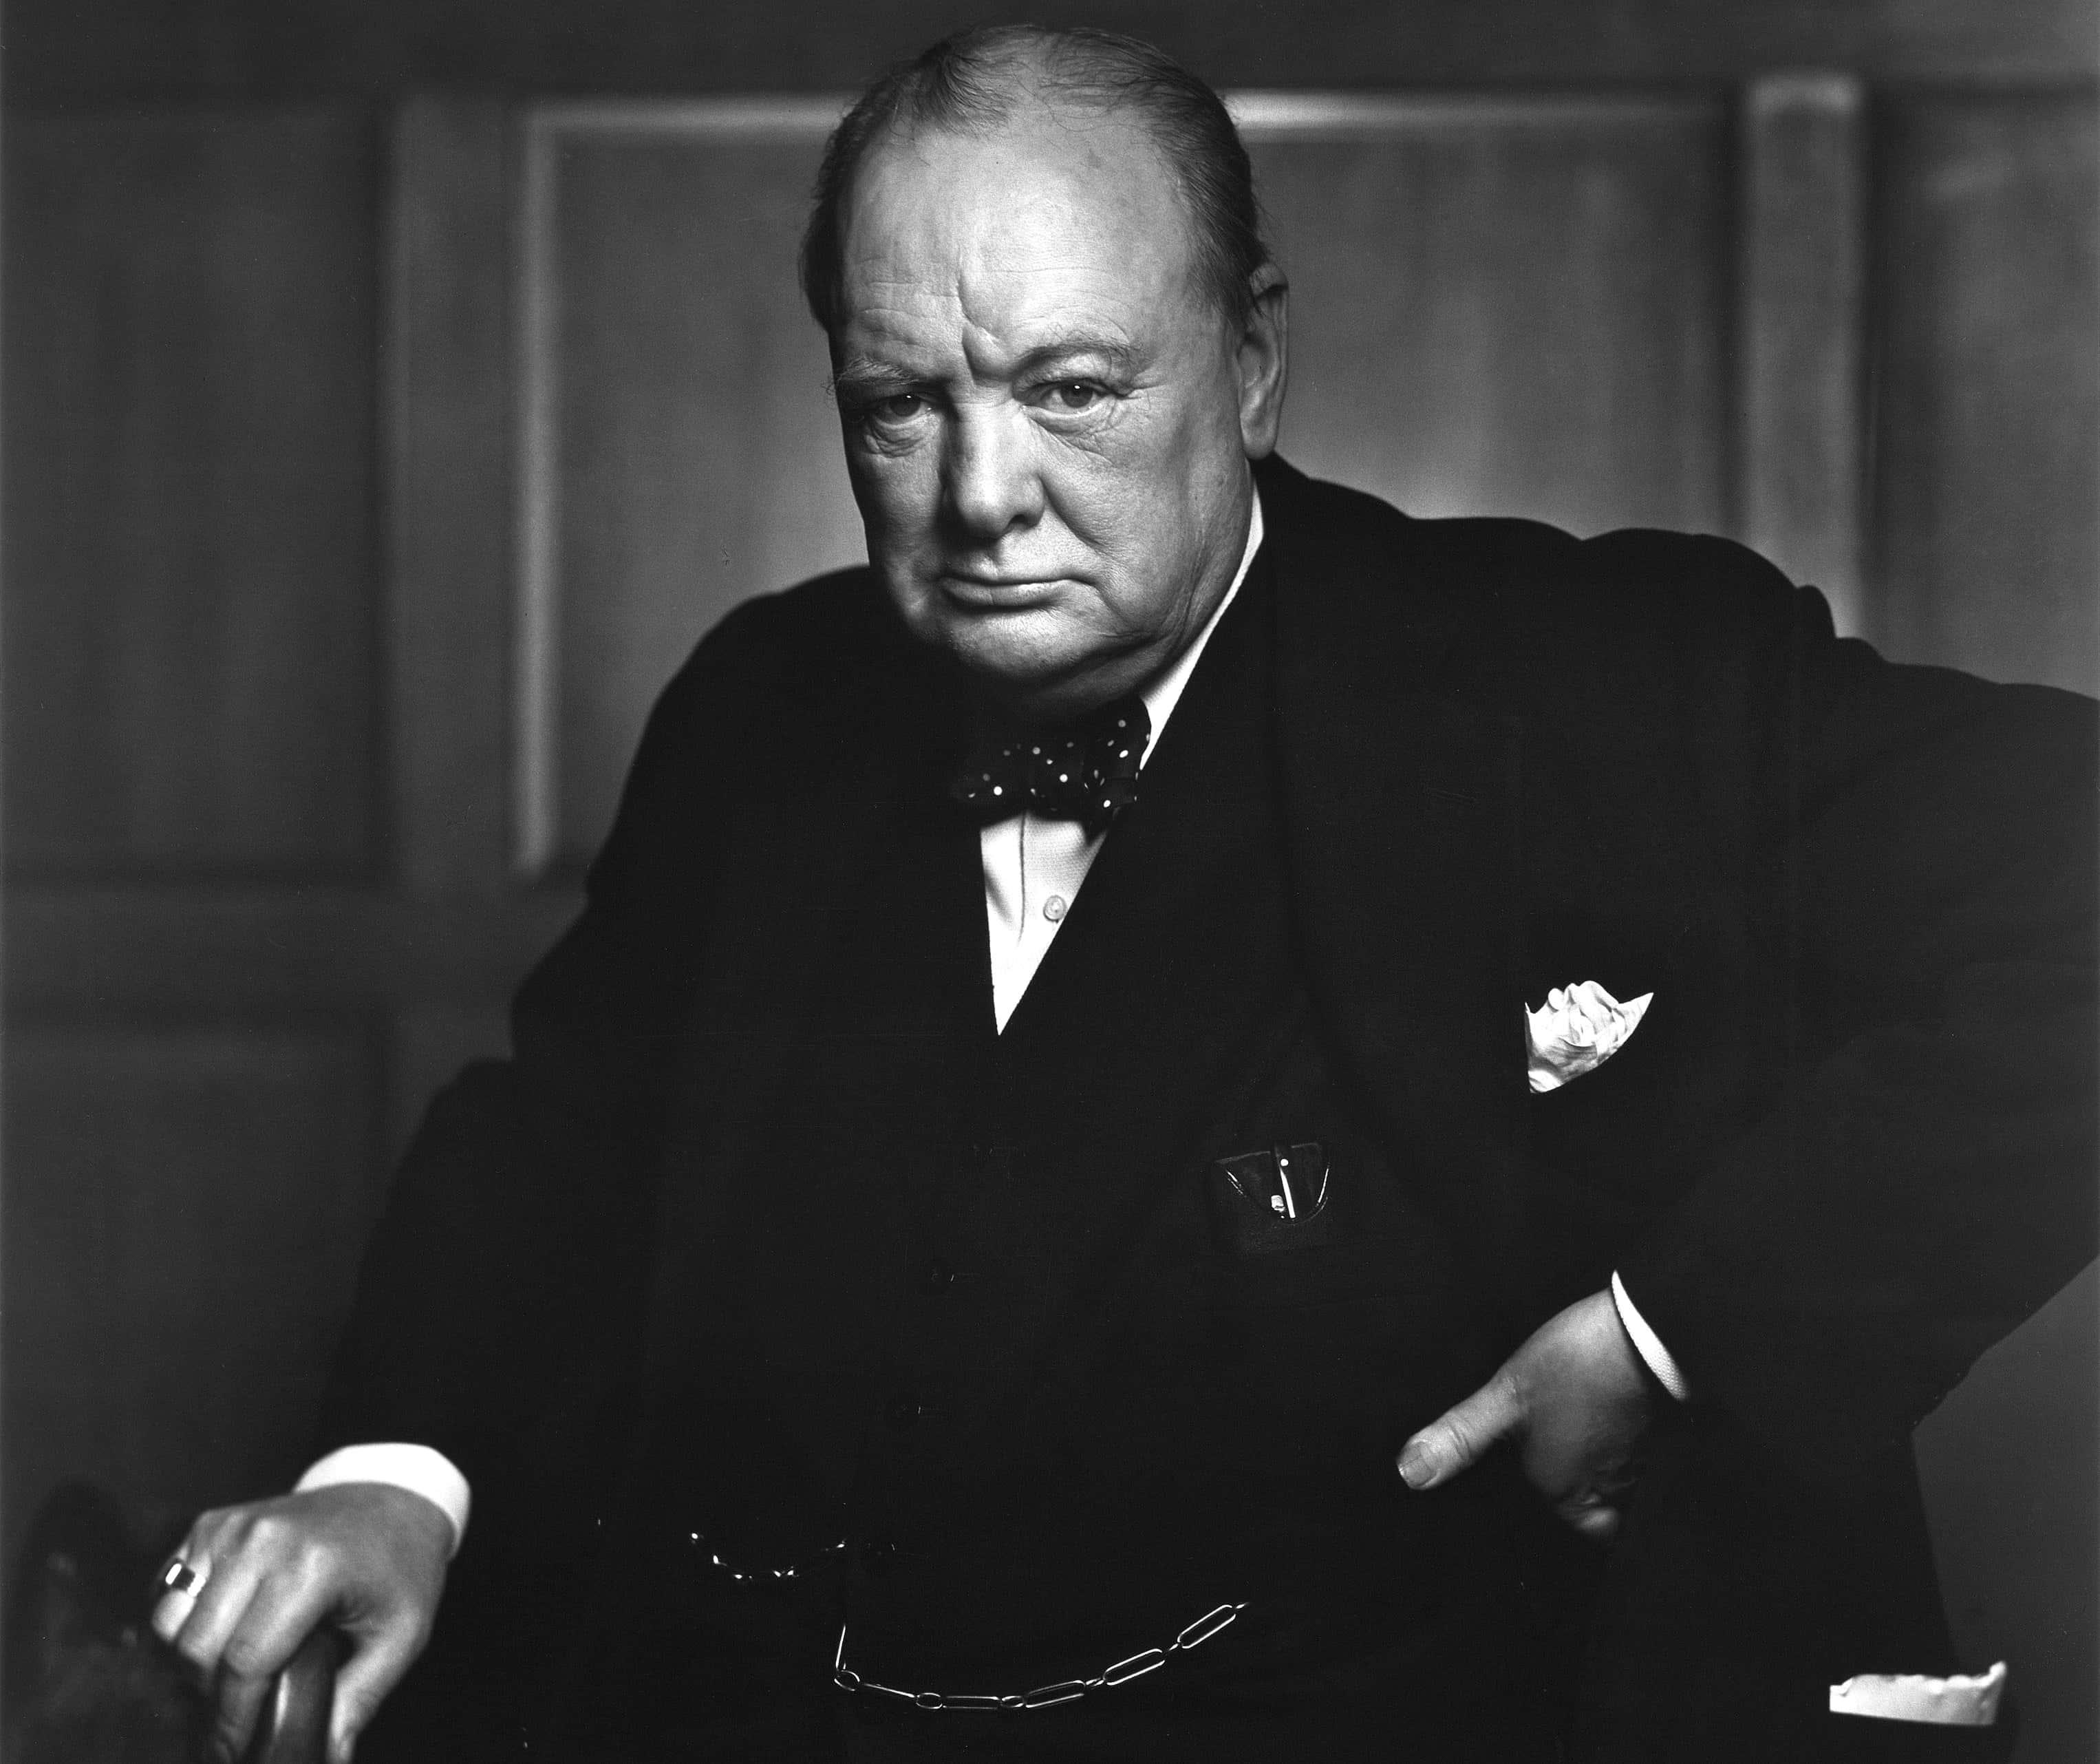 <p>Despite his celebrated career, when Winston Churchill began to slip into a coma shortly before his passing, his last words were “Oh, I am so bored with it all”. Guess the title of "Man of the Half-Century" was exciting enough for him.</p><p>Sources: <a href="https://en.wikipedia.org/wiki/Time_Person_of_the_Year" rel="noopener noreferrer">1</a>, <a href="https://en.wikipedia.org/wiki/Charles_Lindbergh" rel="noopener noreferrer">2</a>, <a href="https://en.wikipedia.org/wiki/Rudy_Giuliani" rel="noopener noreferrer">3</a>, <a href="https://www.npr.org/2016/08/16/490200895/rudy-giuliani-claims-no-terror-attacks-in-u-s-pre-obama" rel="noopener noreferrer">4</a>, <a href="https://en.wikipedia.org/wiki/Wallis_Simpson" rel="noopener noreferrer">5</a>, <a href="https://en.wikipedia.org/wiki/George_VI" rel="noopener noreferrer">6</a>, <a href="http://mentalfloss.com/article/58534/64-people-and-their-famous-last-words" rel="noopener noreferrer">7</a></p>